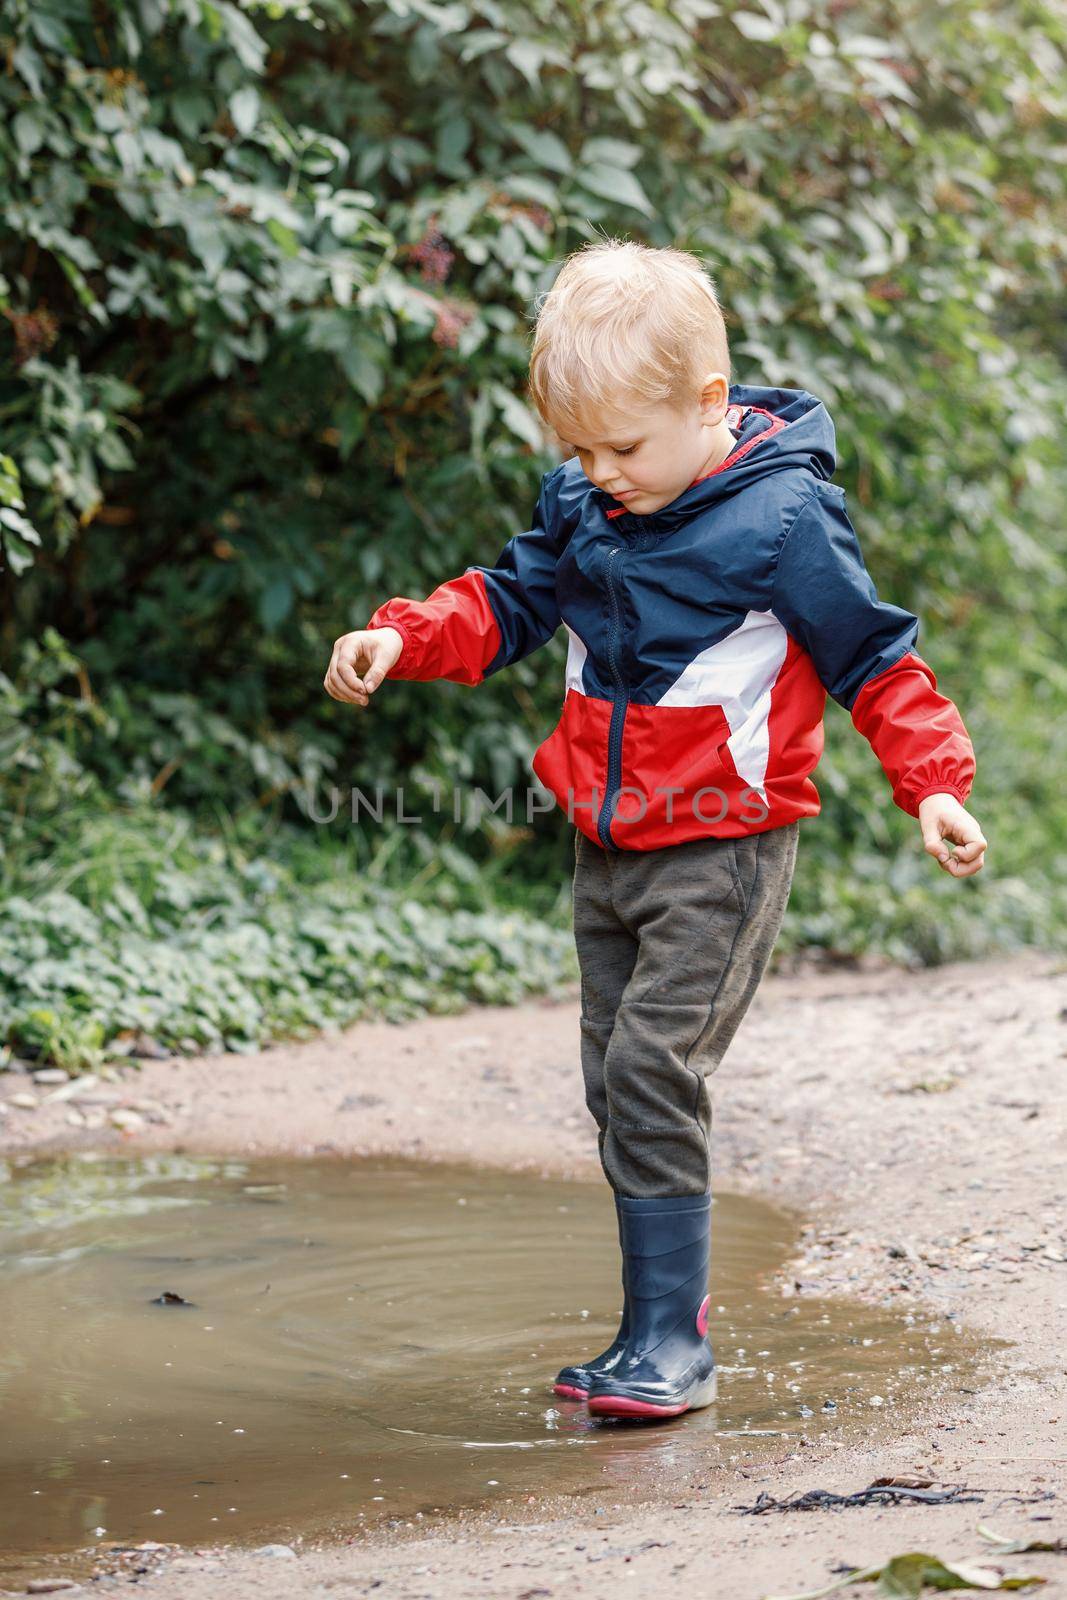 A young blond boy in a blue and red raincoat and rain boots happily go in a puddle of water and mud.